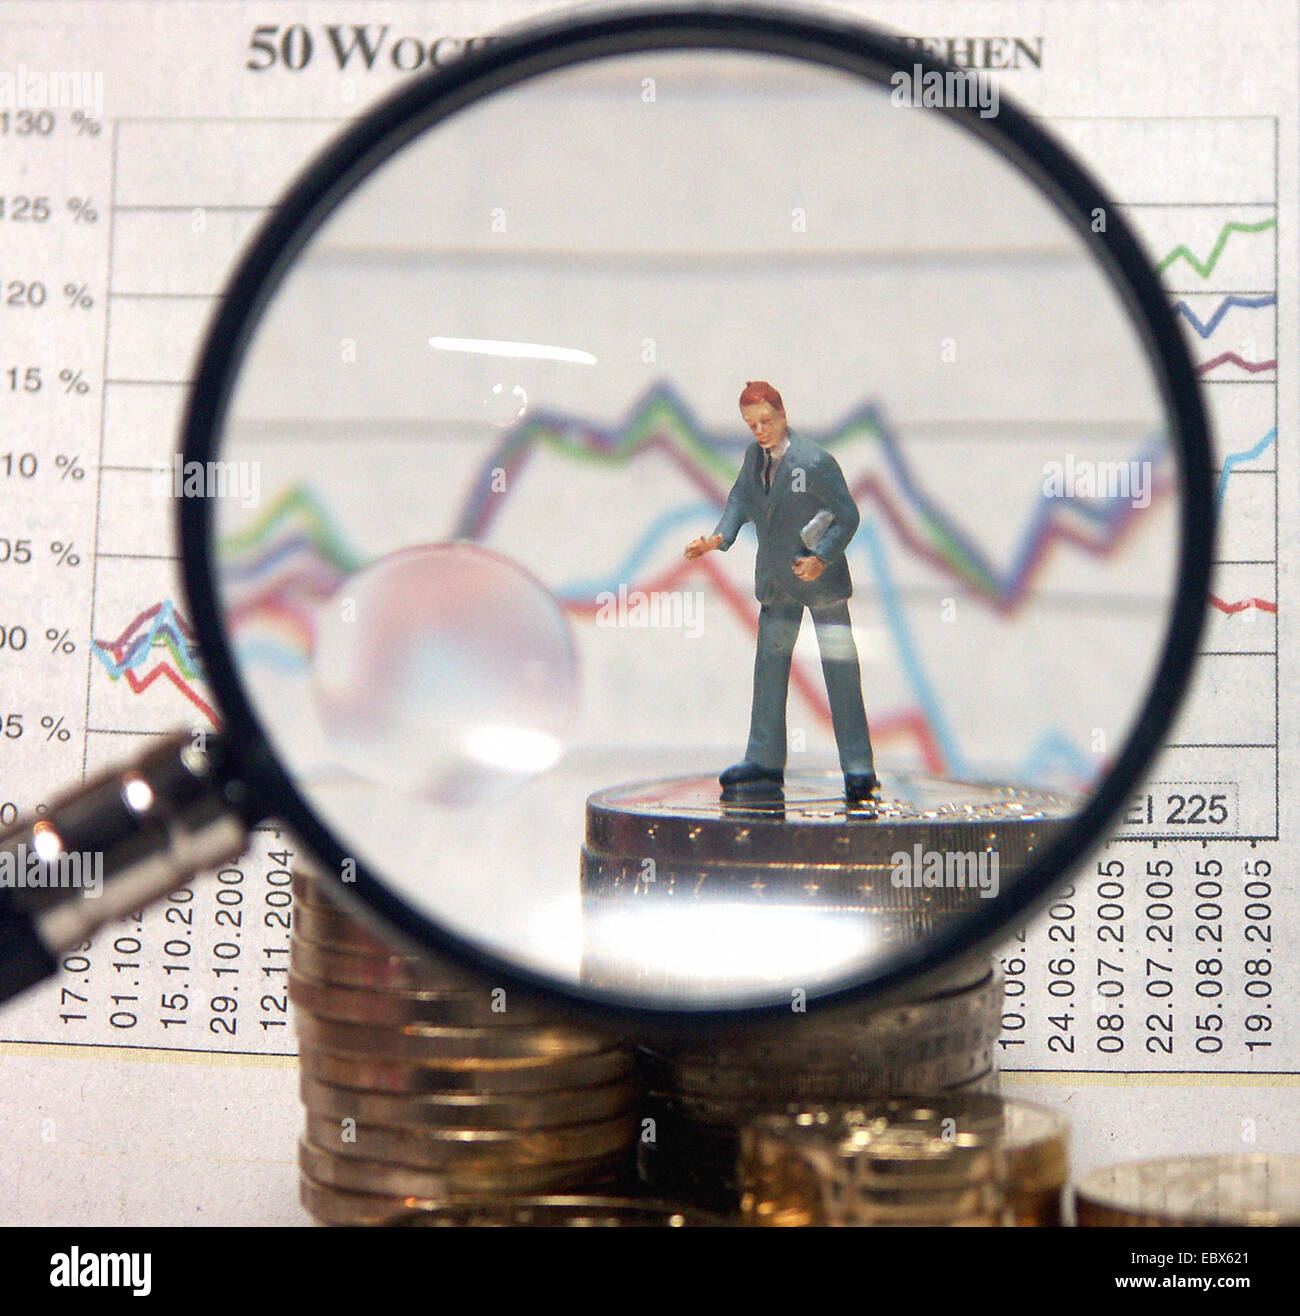 Symbolphoto share price, little figure at coins Stock Photo